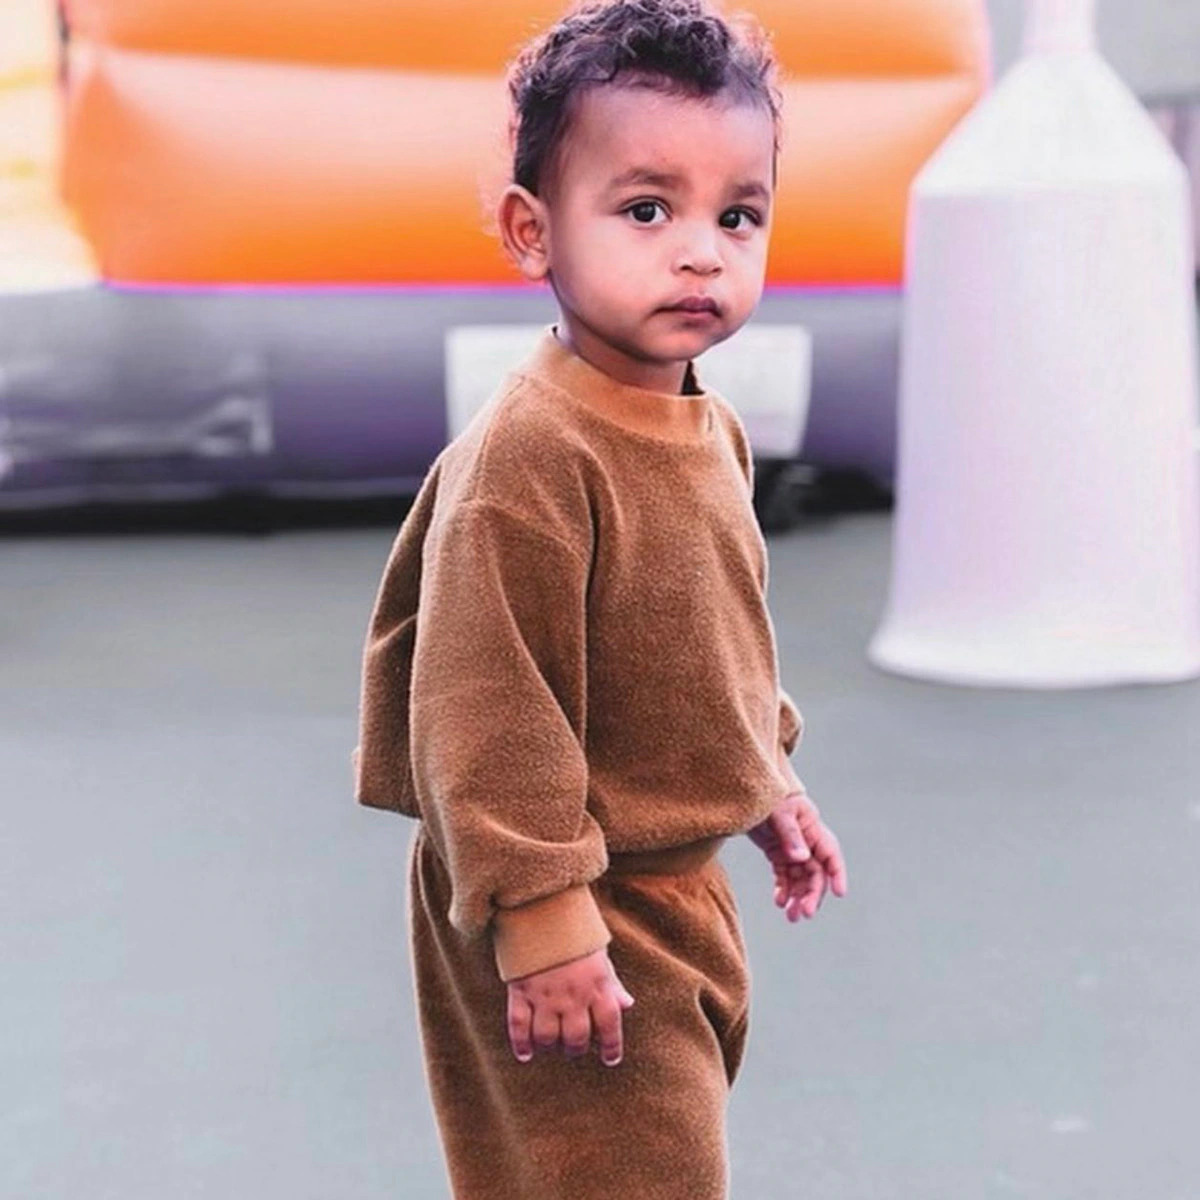 PSALM WEST™: A Brand Is Born